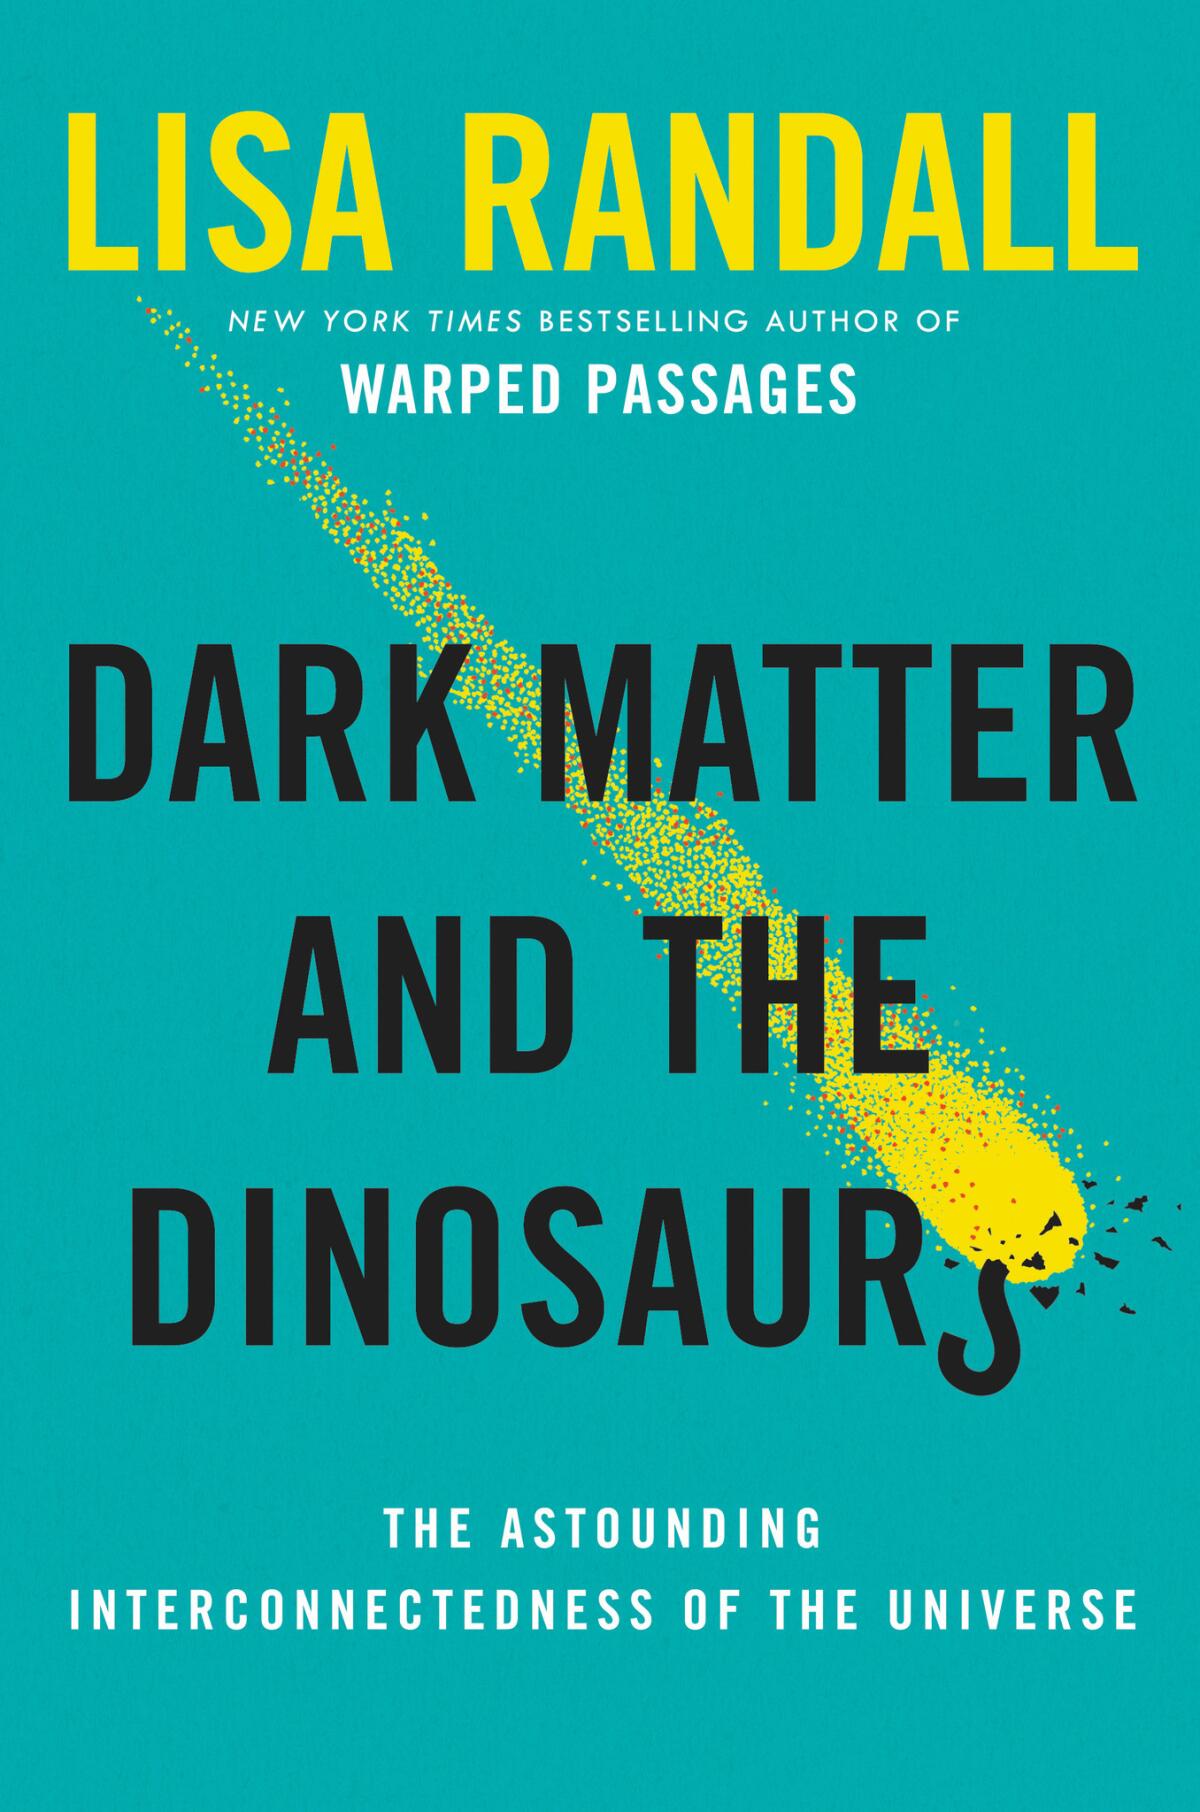 'Dark Matter and the Dinosaurs' by Lisa Randall